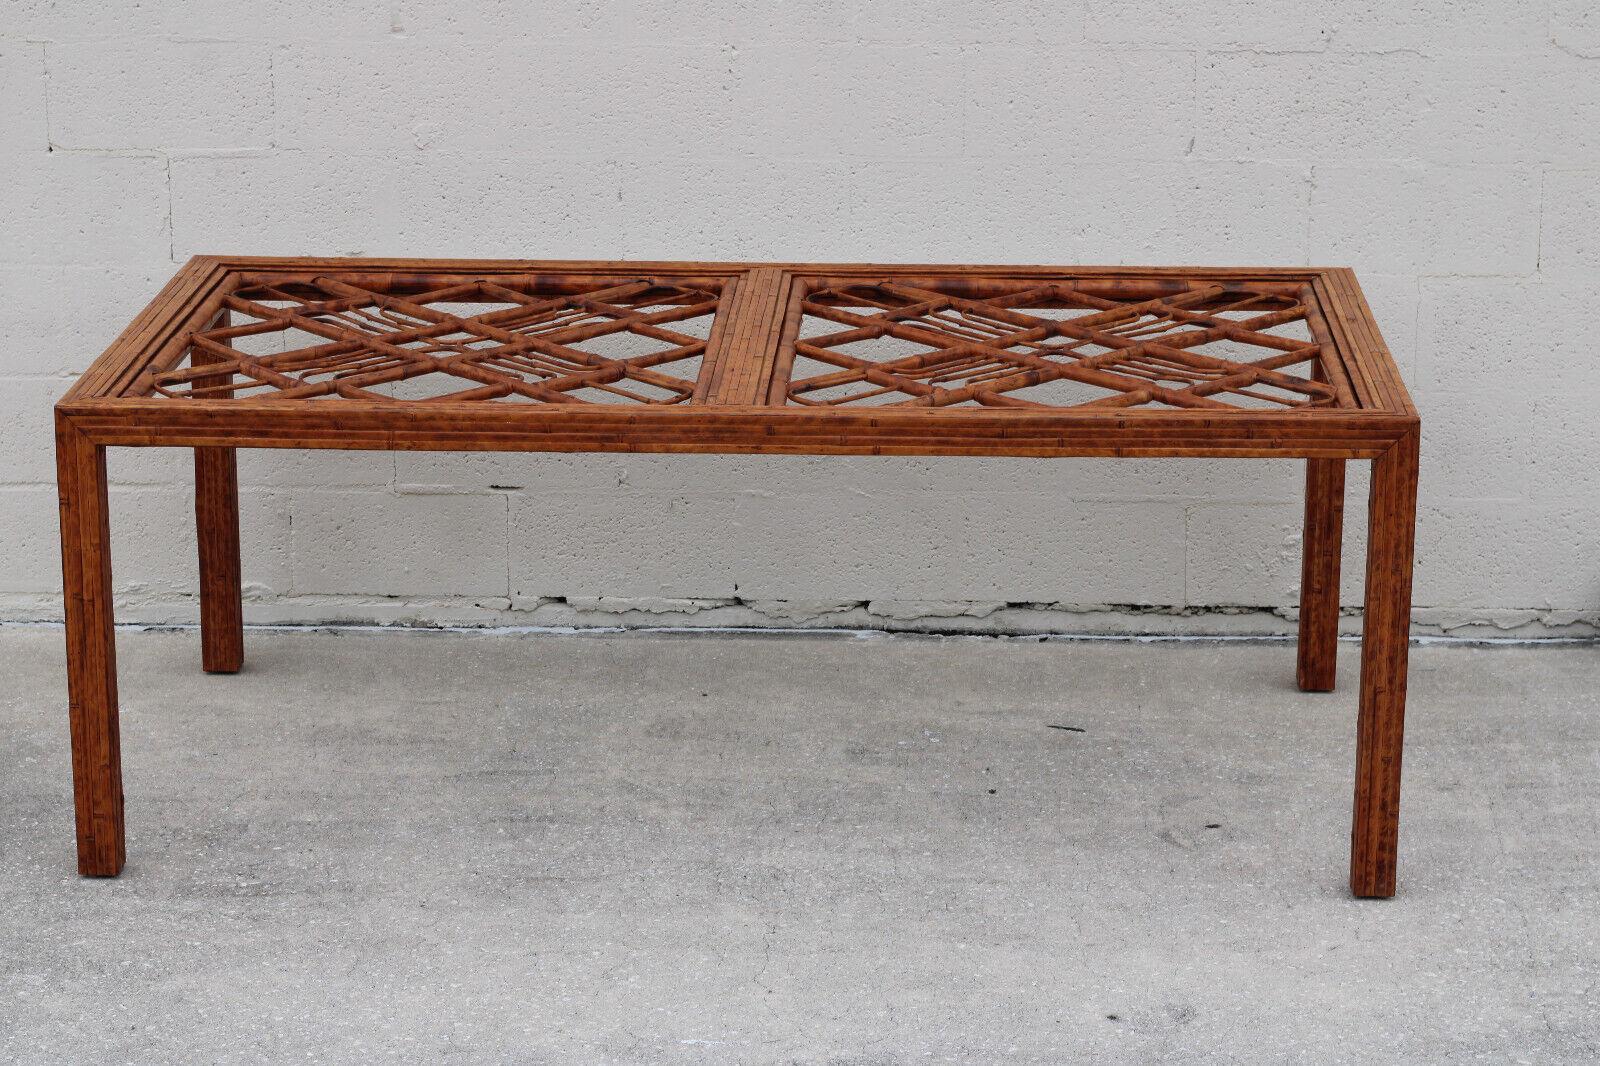 Hand-Crafted Vintage Brighton Style Tortoiseshell Bamboo Dining Table For Sale